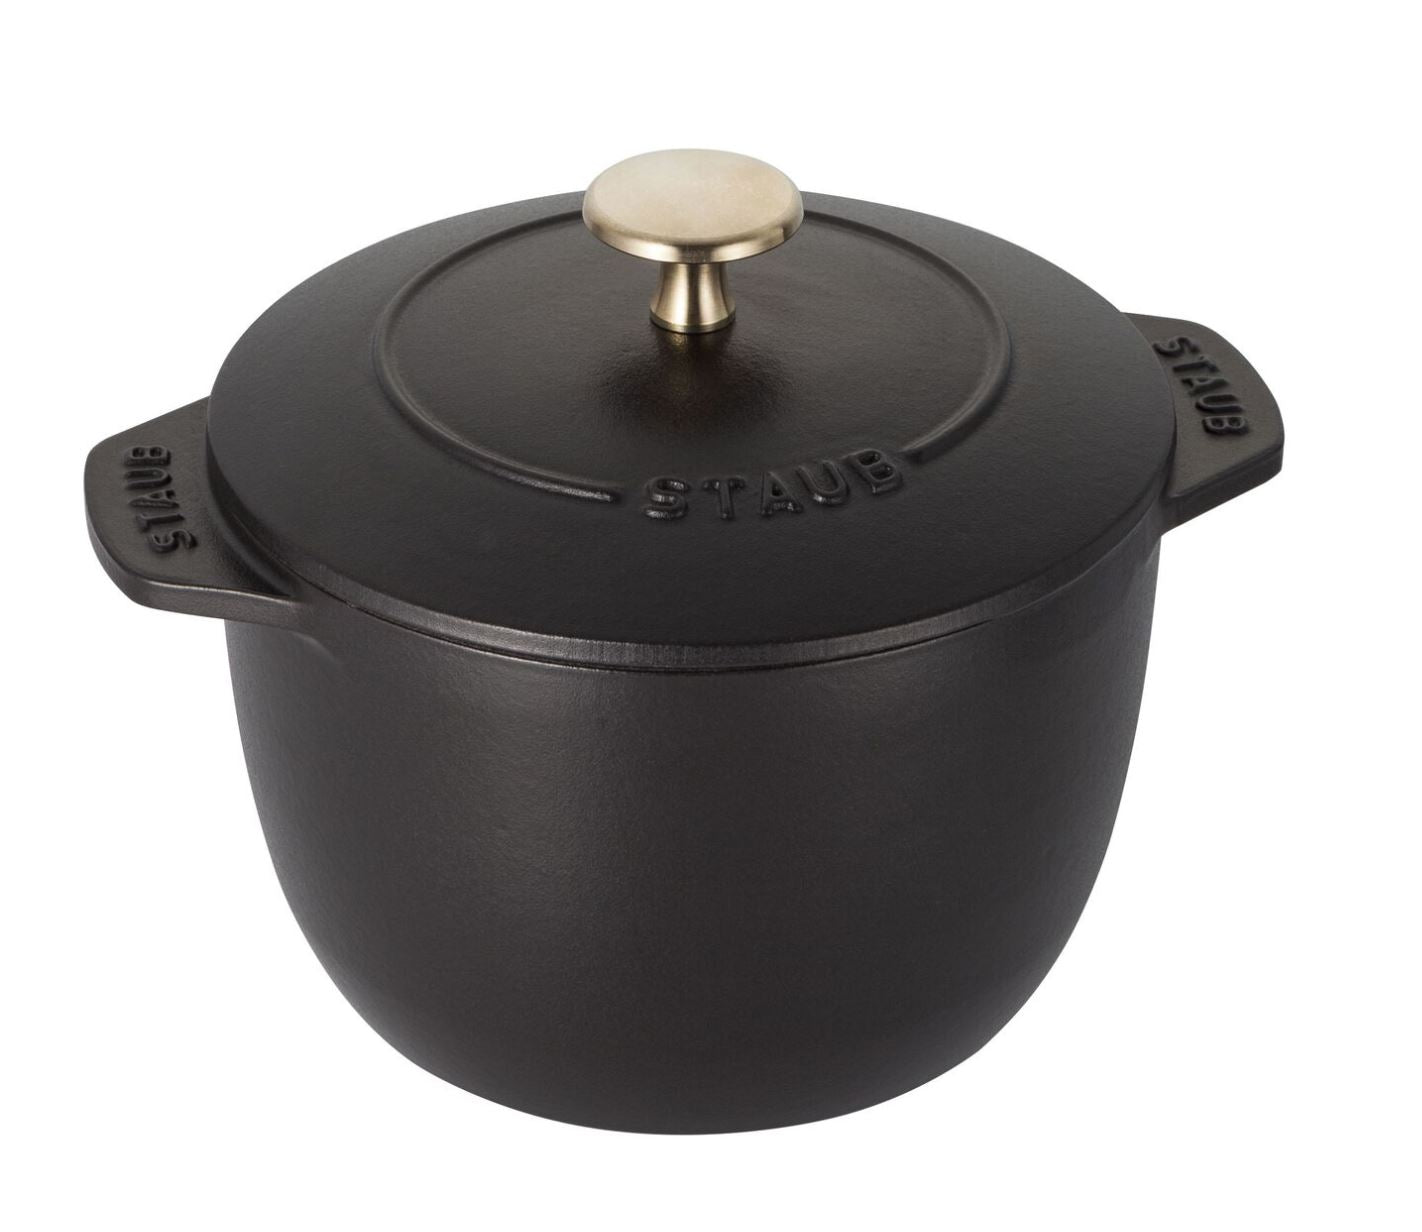 Staub Petite French Oven and Rice Cooker, 1.5 Qt